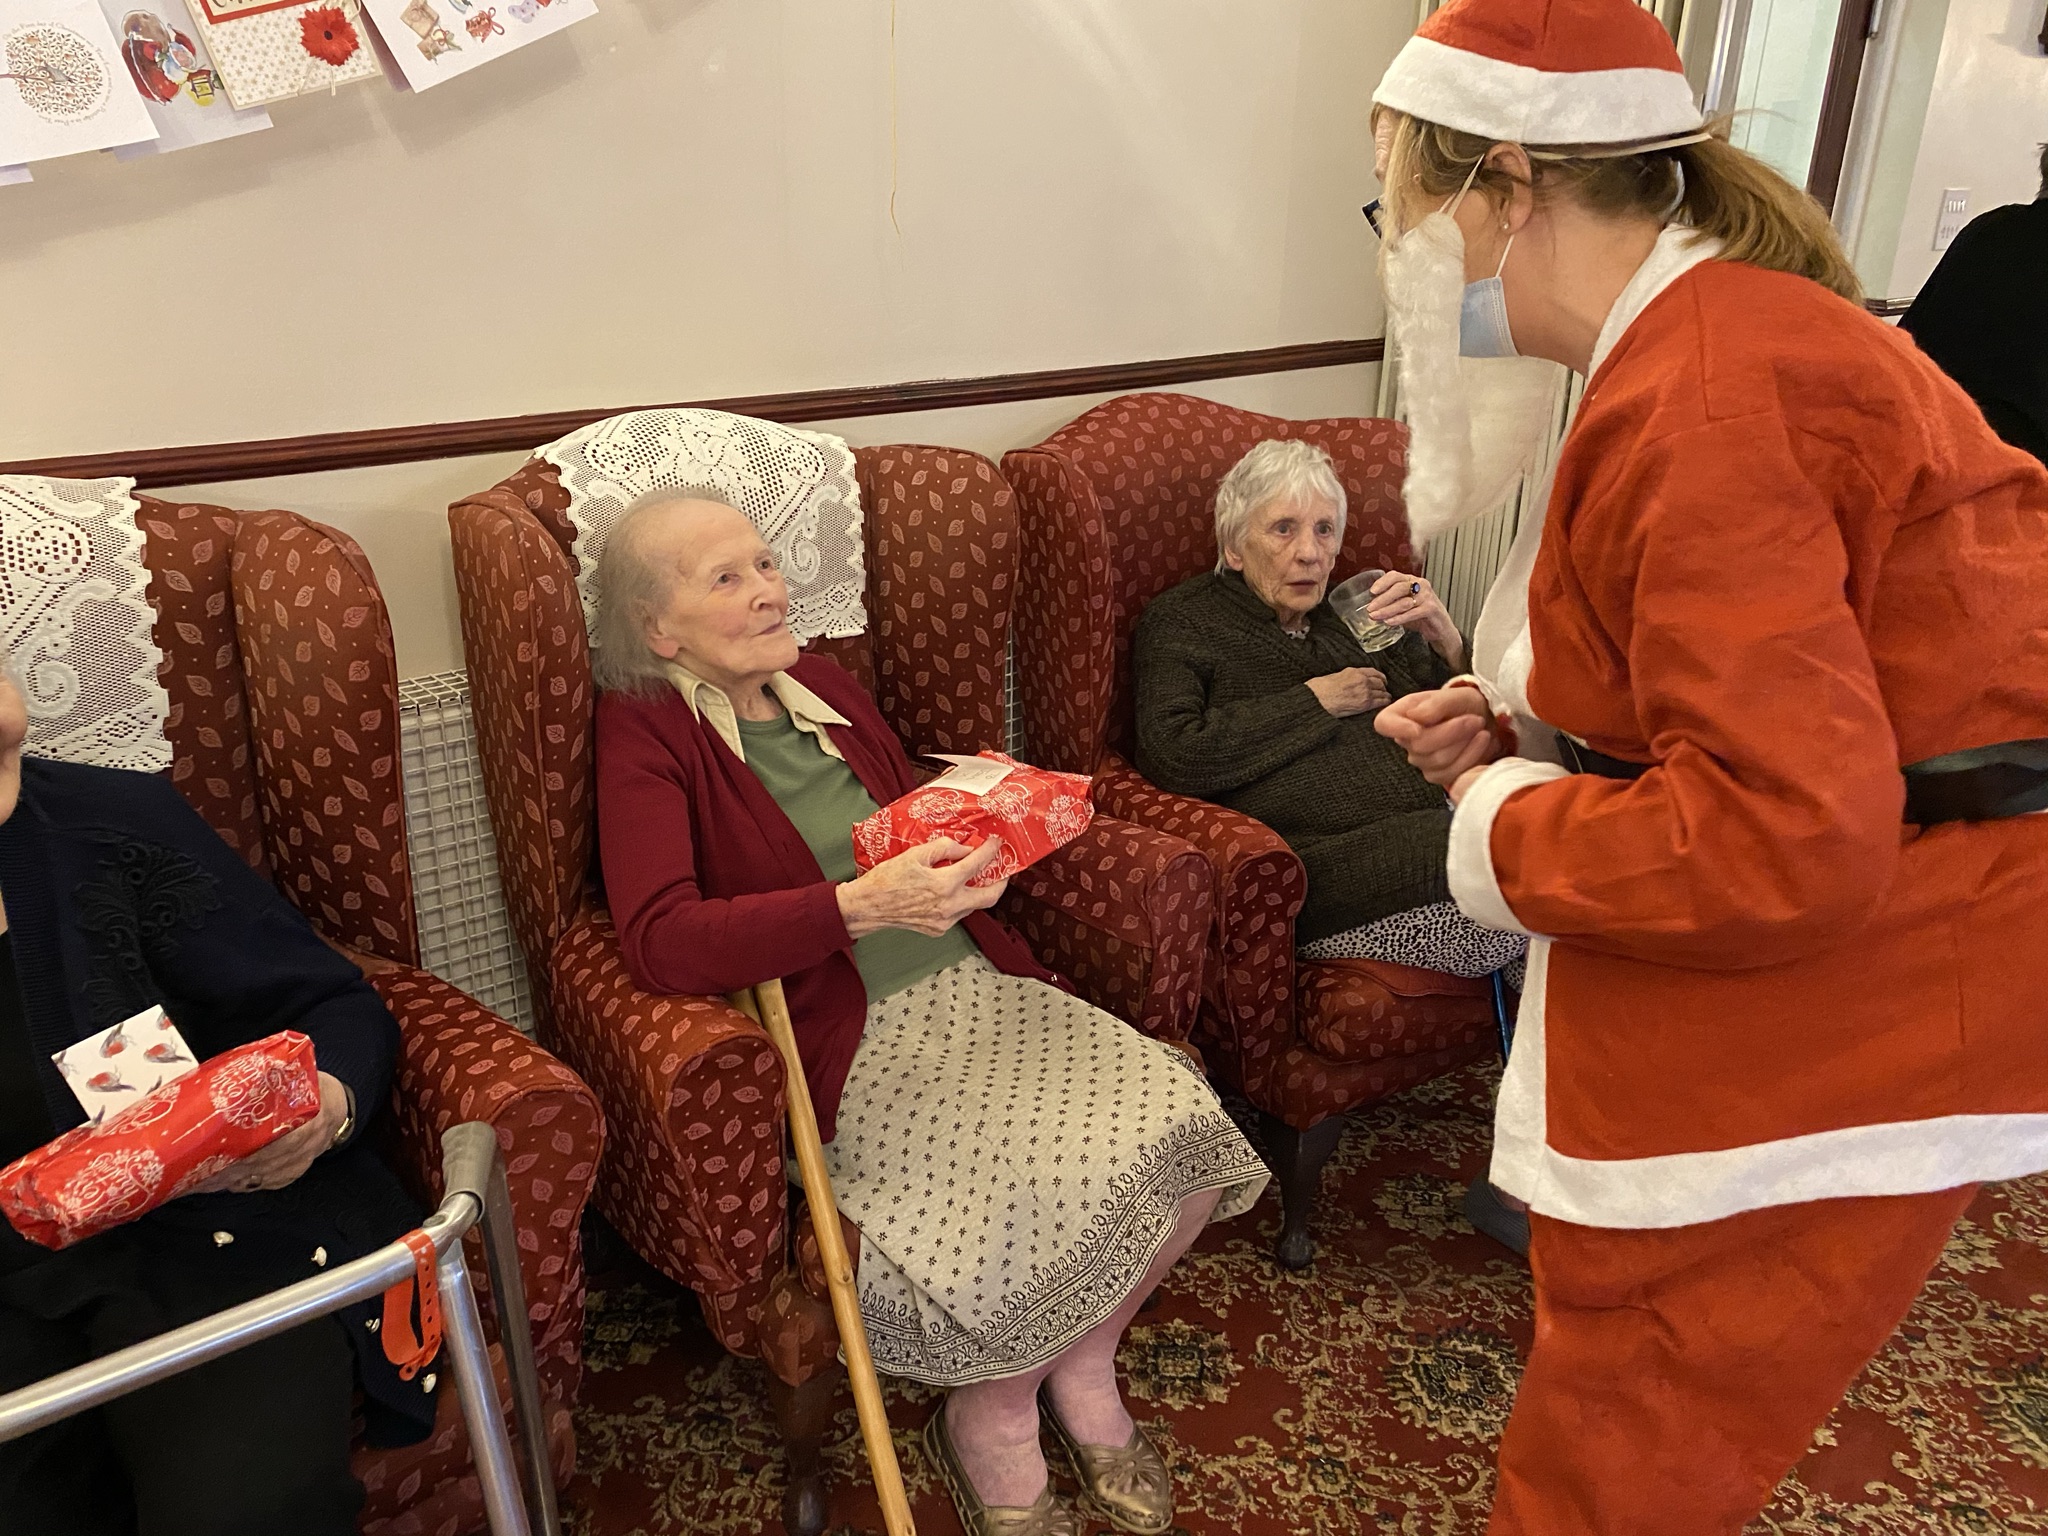 Santa Came to Visit! - 23.12.20 - Please see our Christmas 2020 Page by clicking on the image!